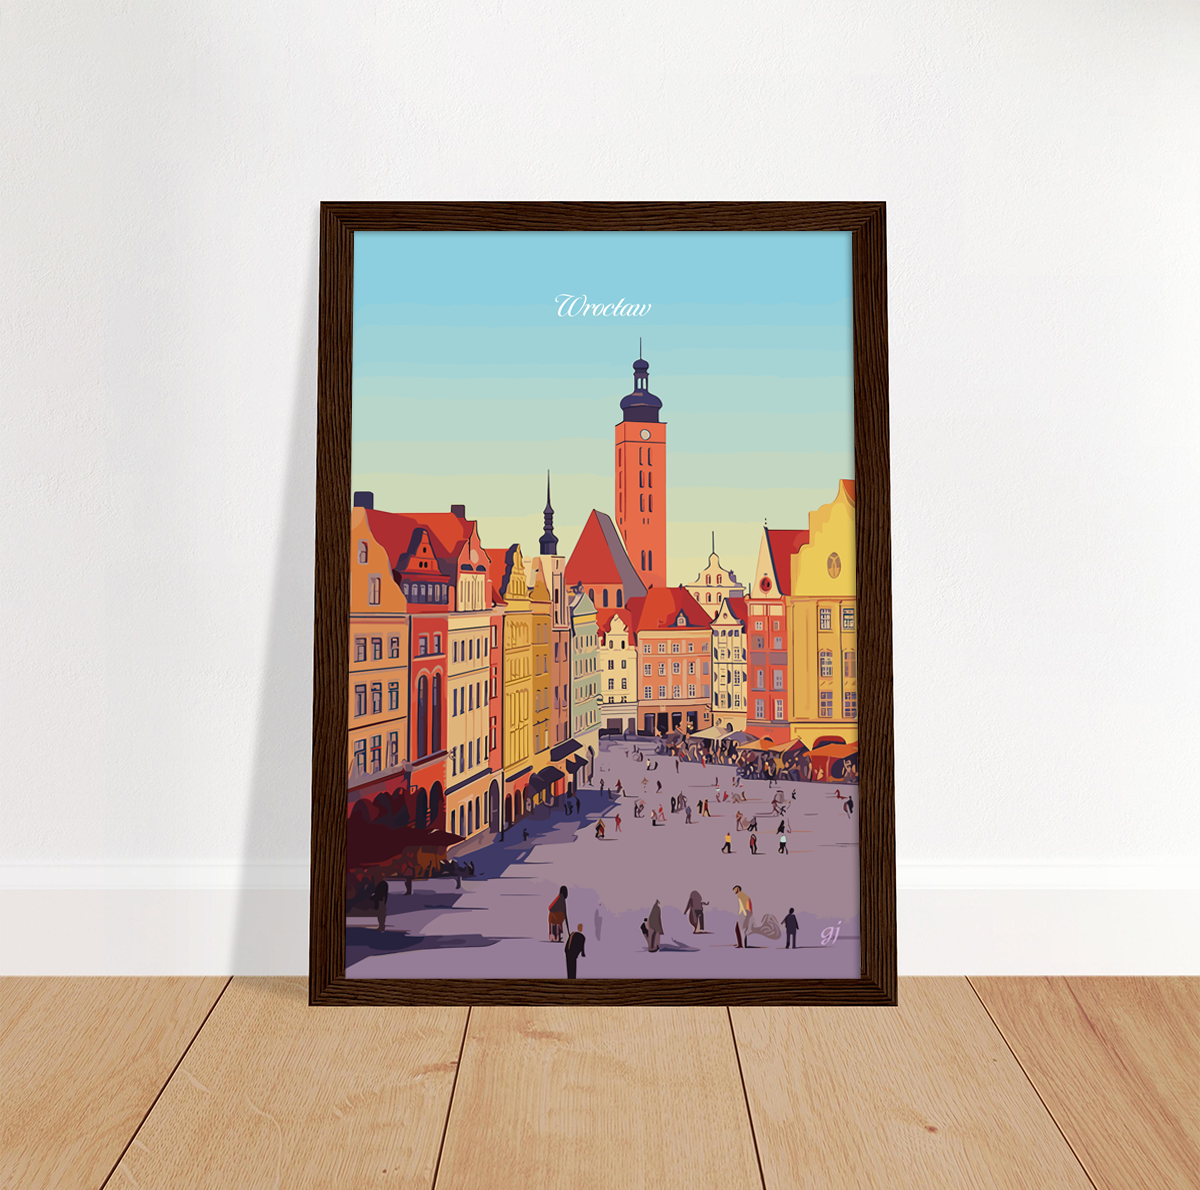 Wroclaw poster by bon voyage design